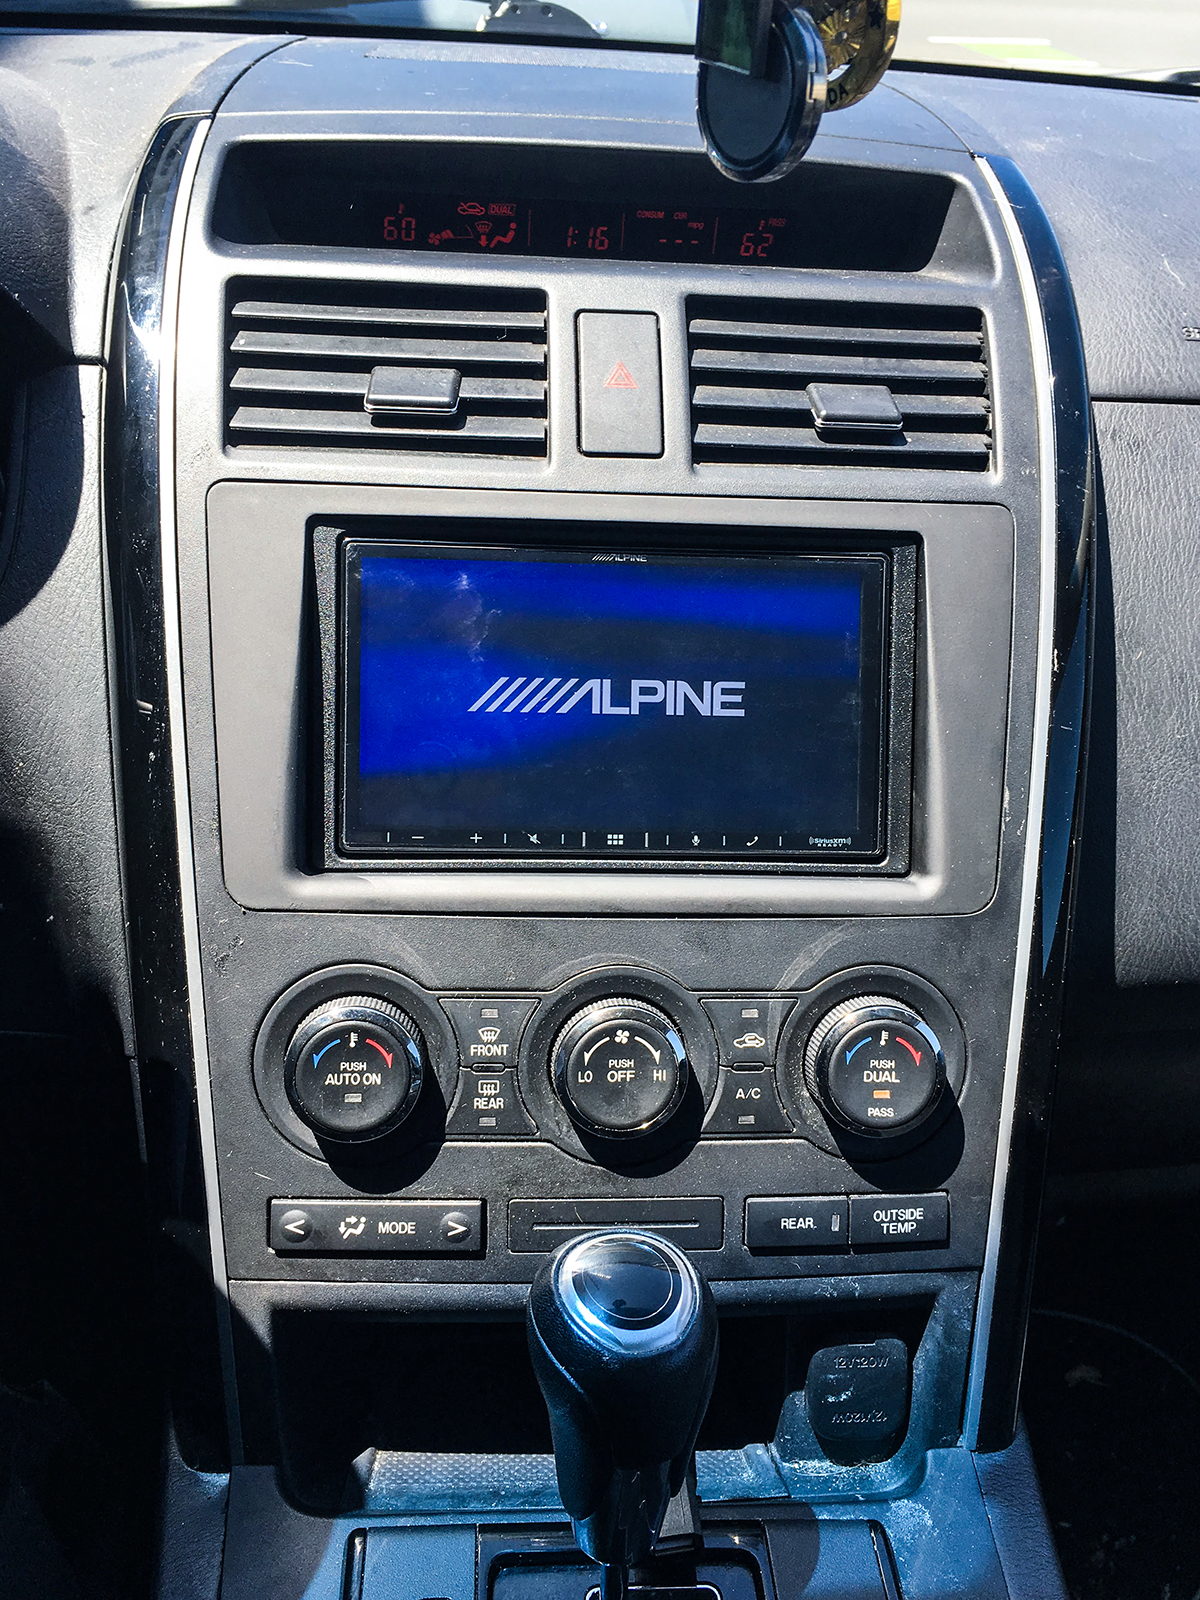 2015 Mazda Cx9 Stereo After.jpg